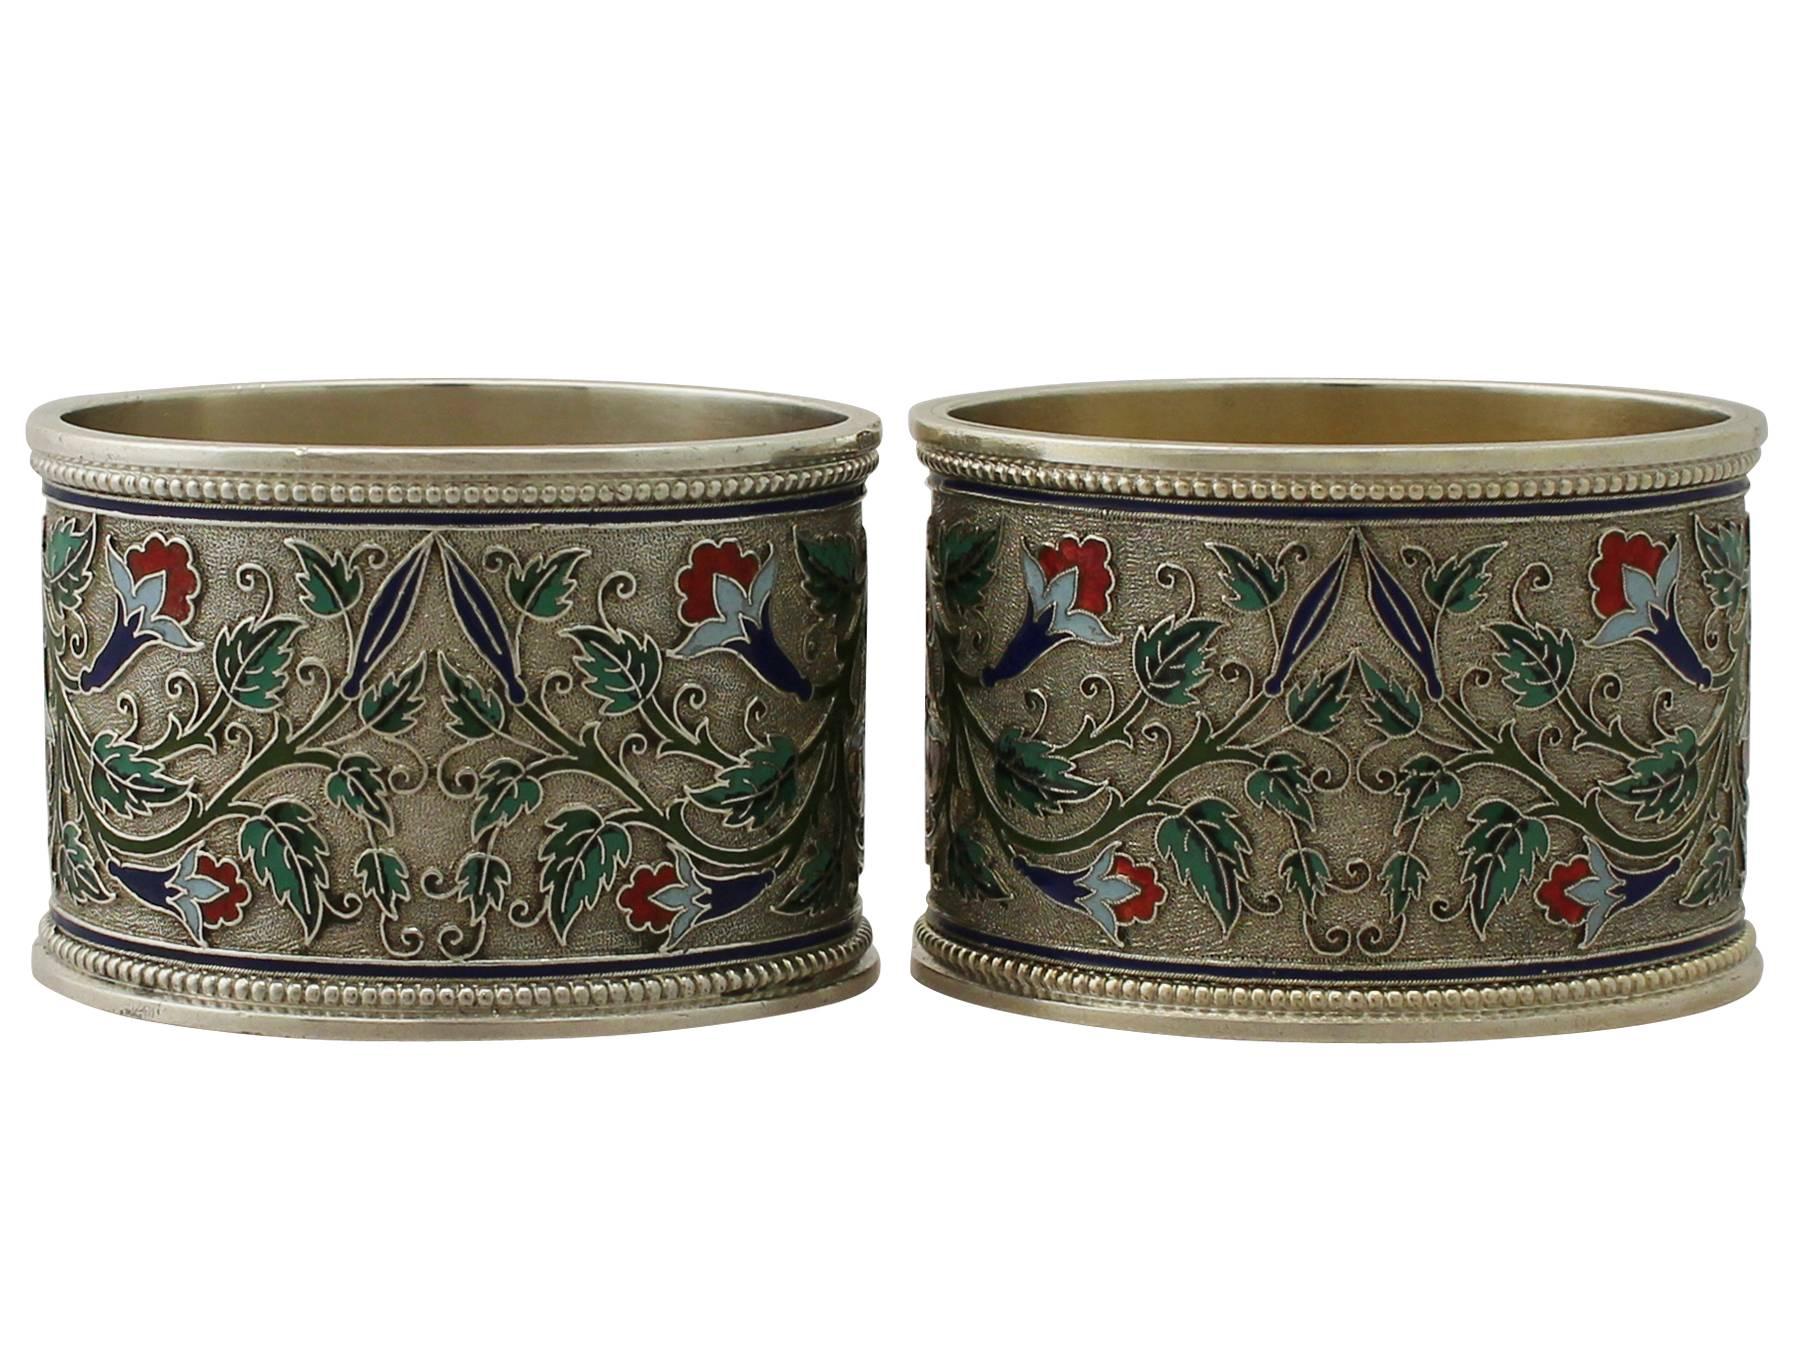 An exceptional, fine and impressive pair of antique Russian silver gilt and polychrome cloisonné enamel napkin rings; an addition to our collection of dining silverware.

These exceptional antique Russian silver gilt and polychrome cloisonné